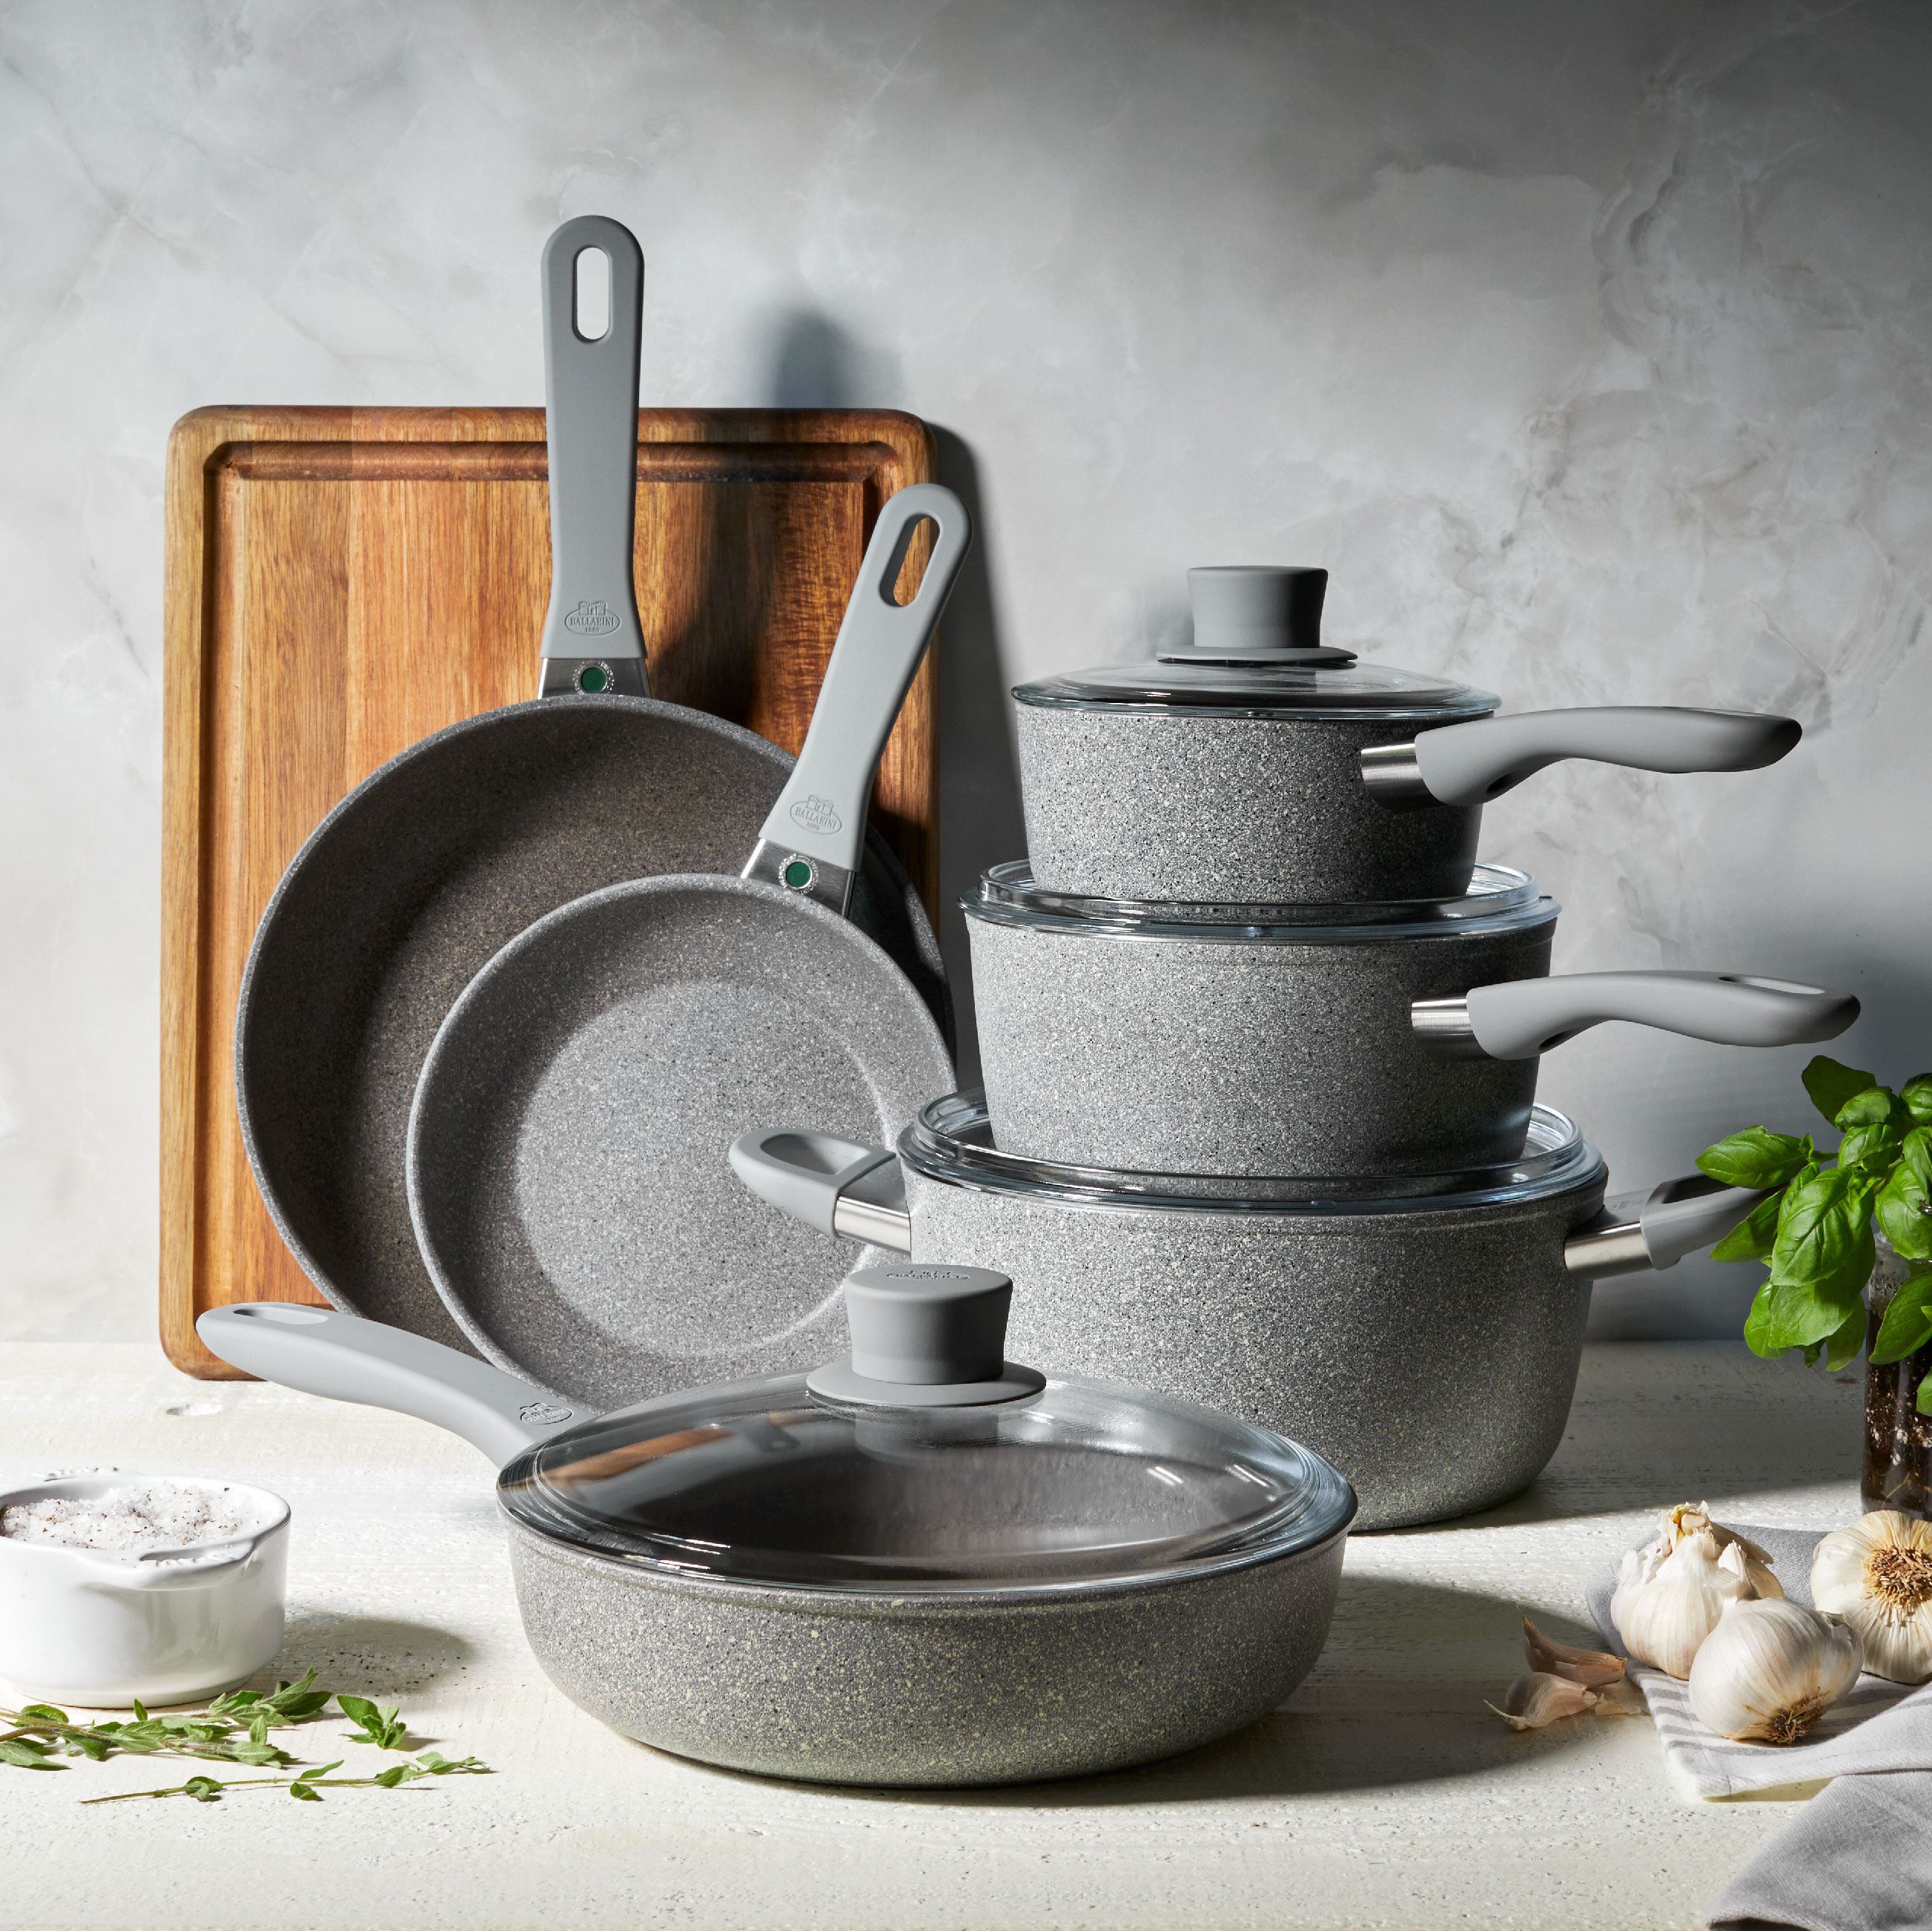 https://www.zwilling.com/on/demandware.static/-/Sites-zwilling-us-Library/default/dw32af3fc0/images/product-content/masonry-content/ballarini/cookware/parma-plus/Ballerini_ParmaPlus_Masonry-06.jpg